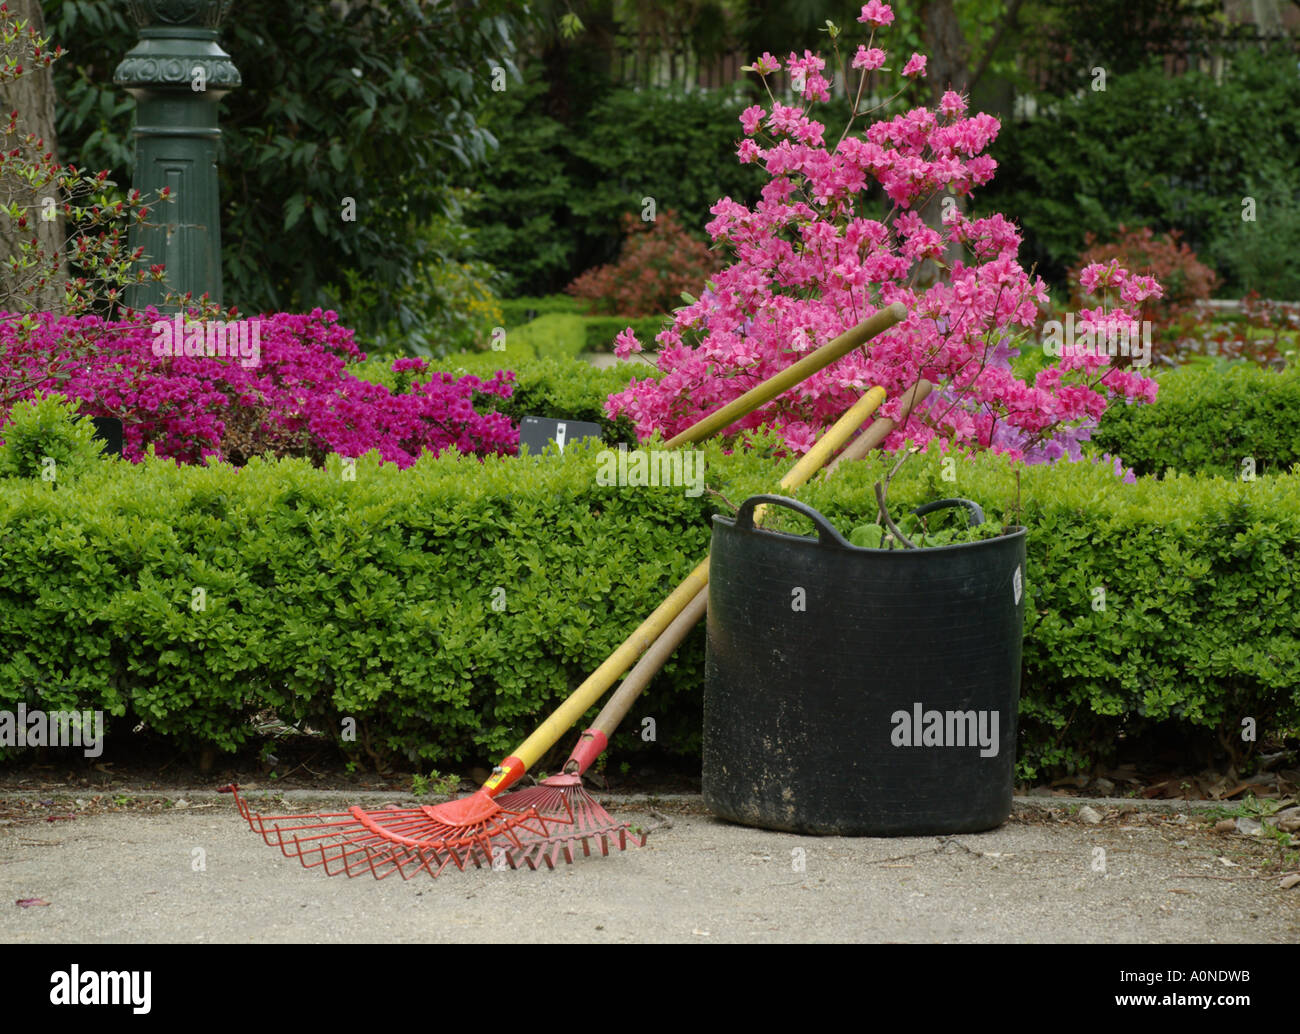 Garden tools in boxwood and rhododendron. Stock Photo